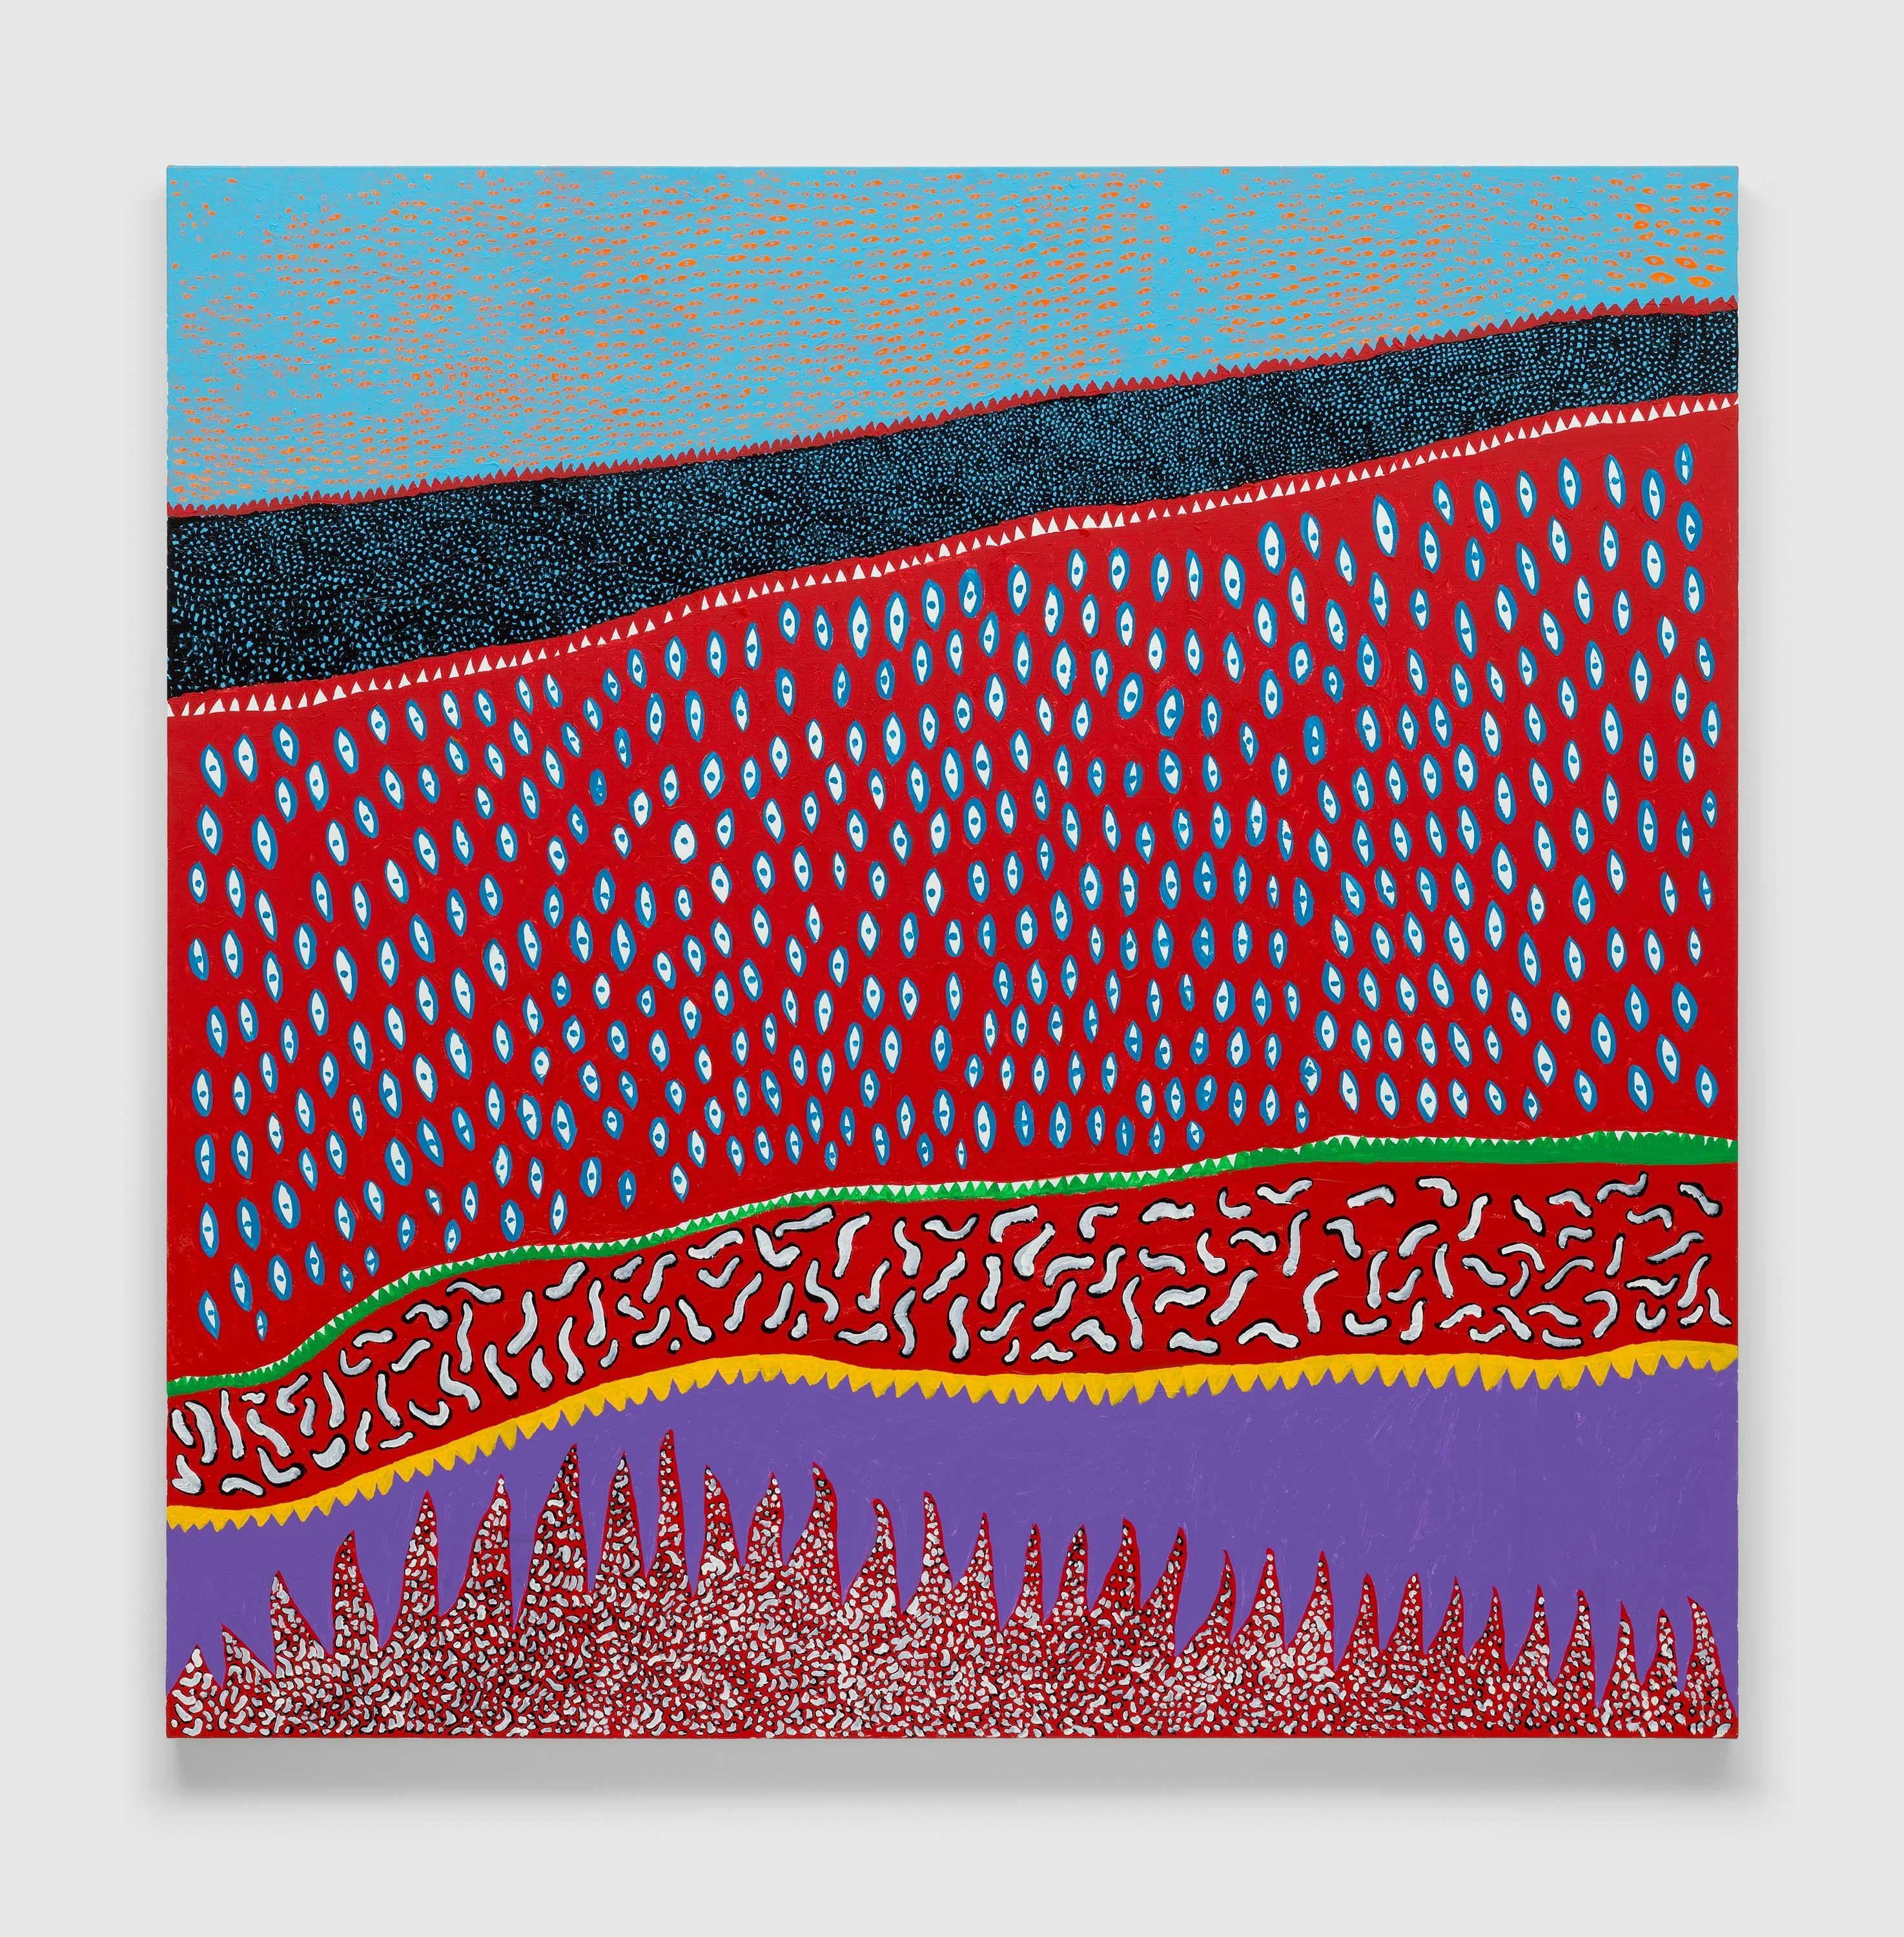 A painting by Yayoi Kusama, titled RESTING AT THE RIVERSIDE, dated 2014.